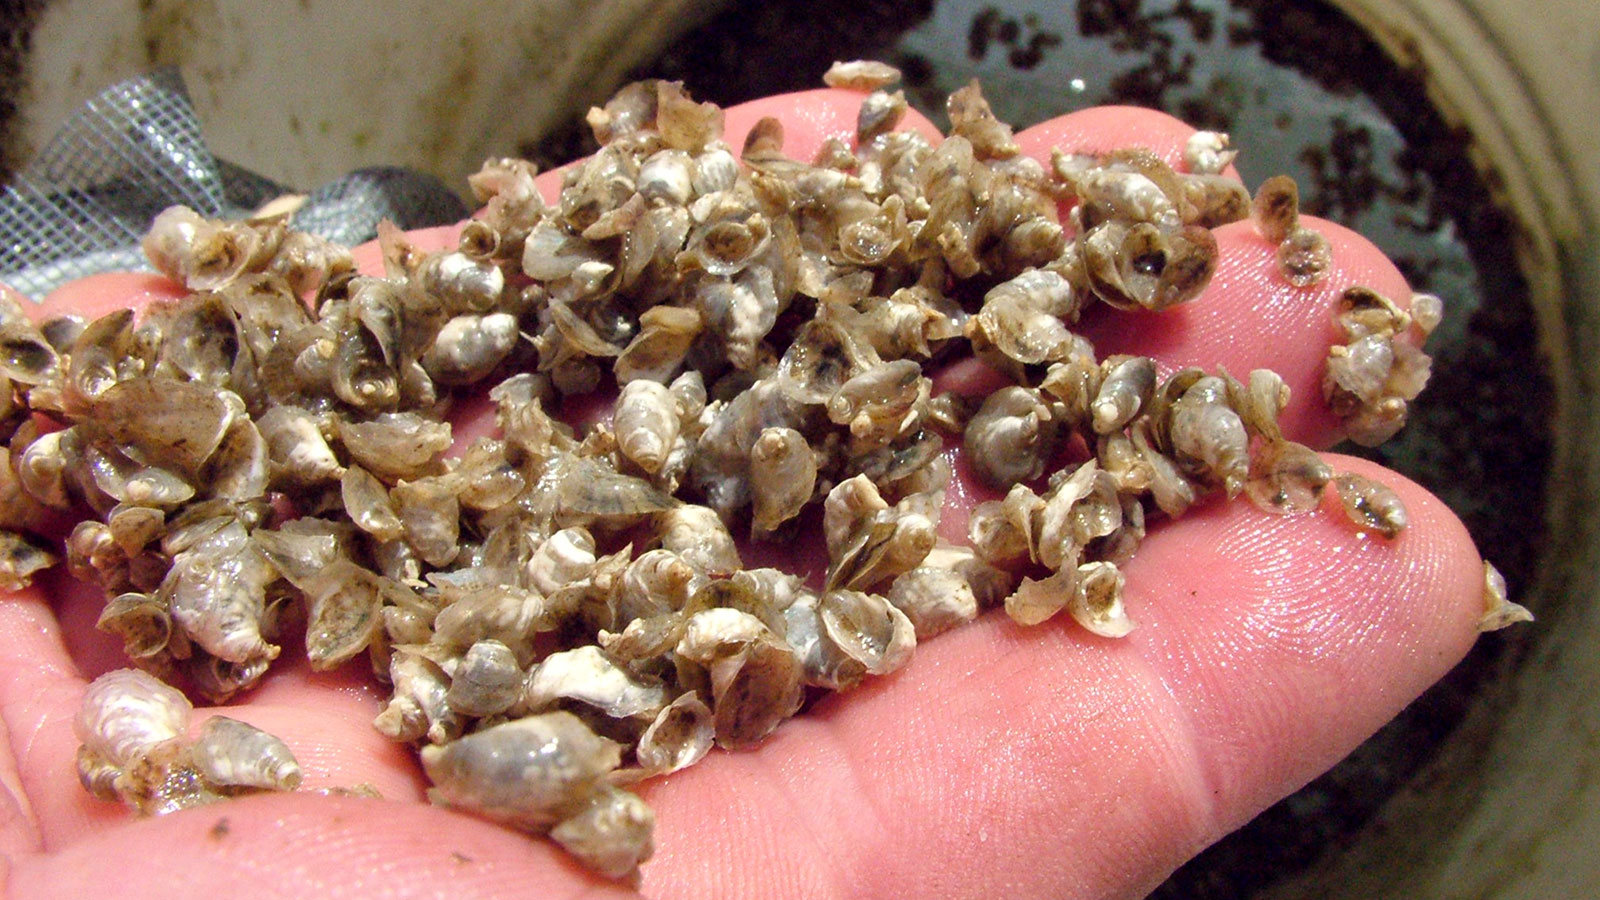 Baby oysters